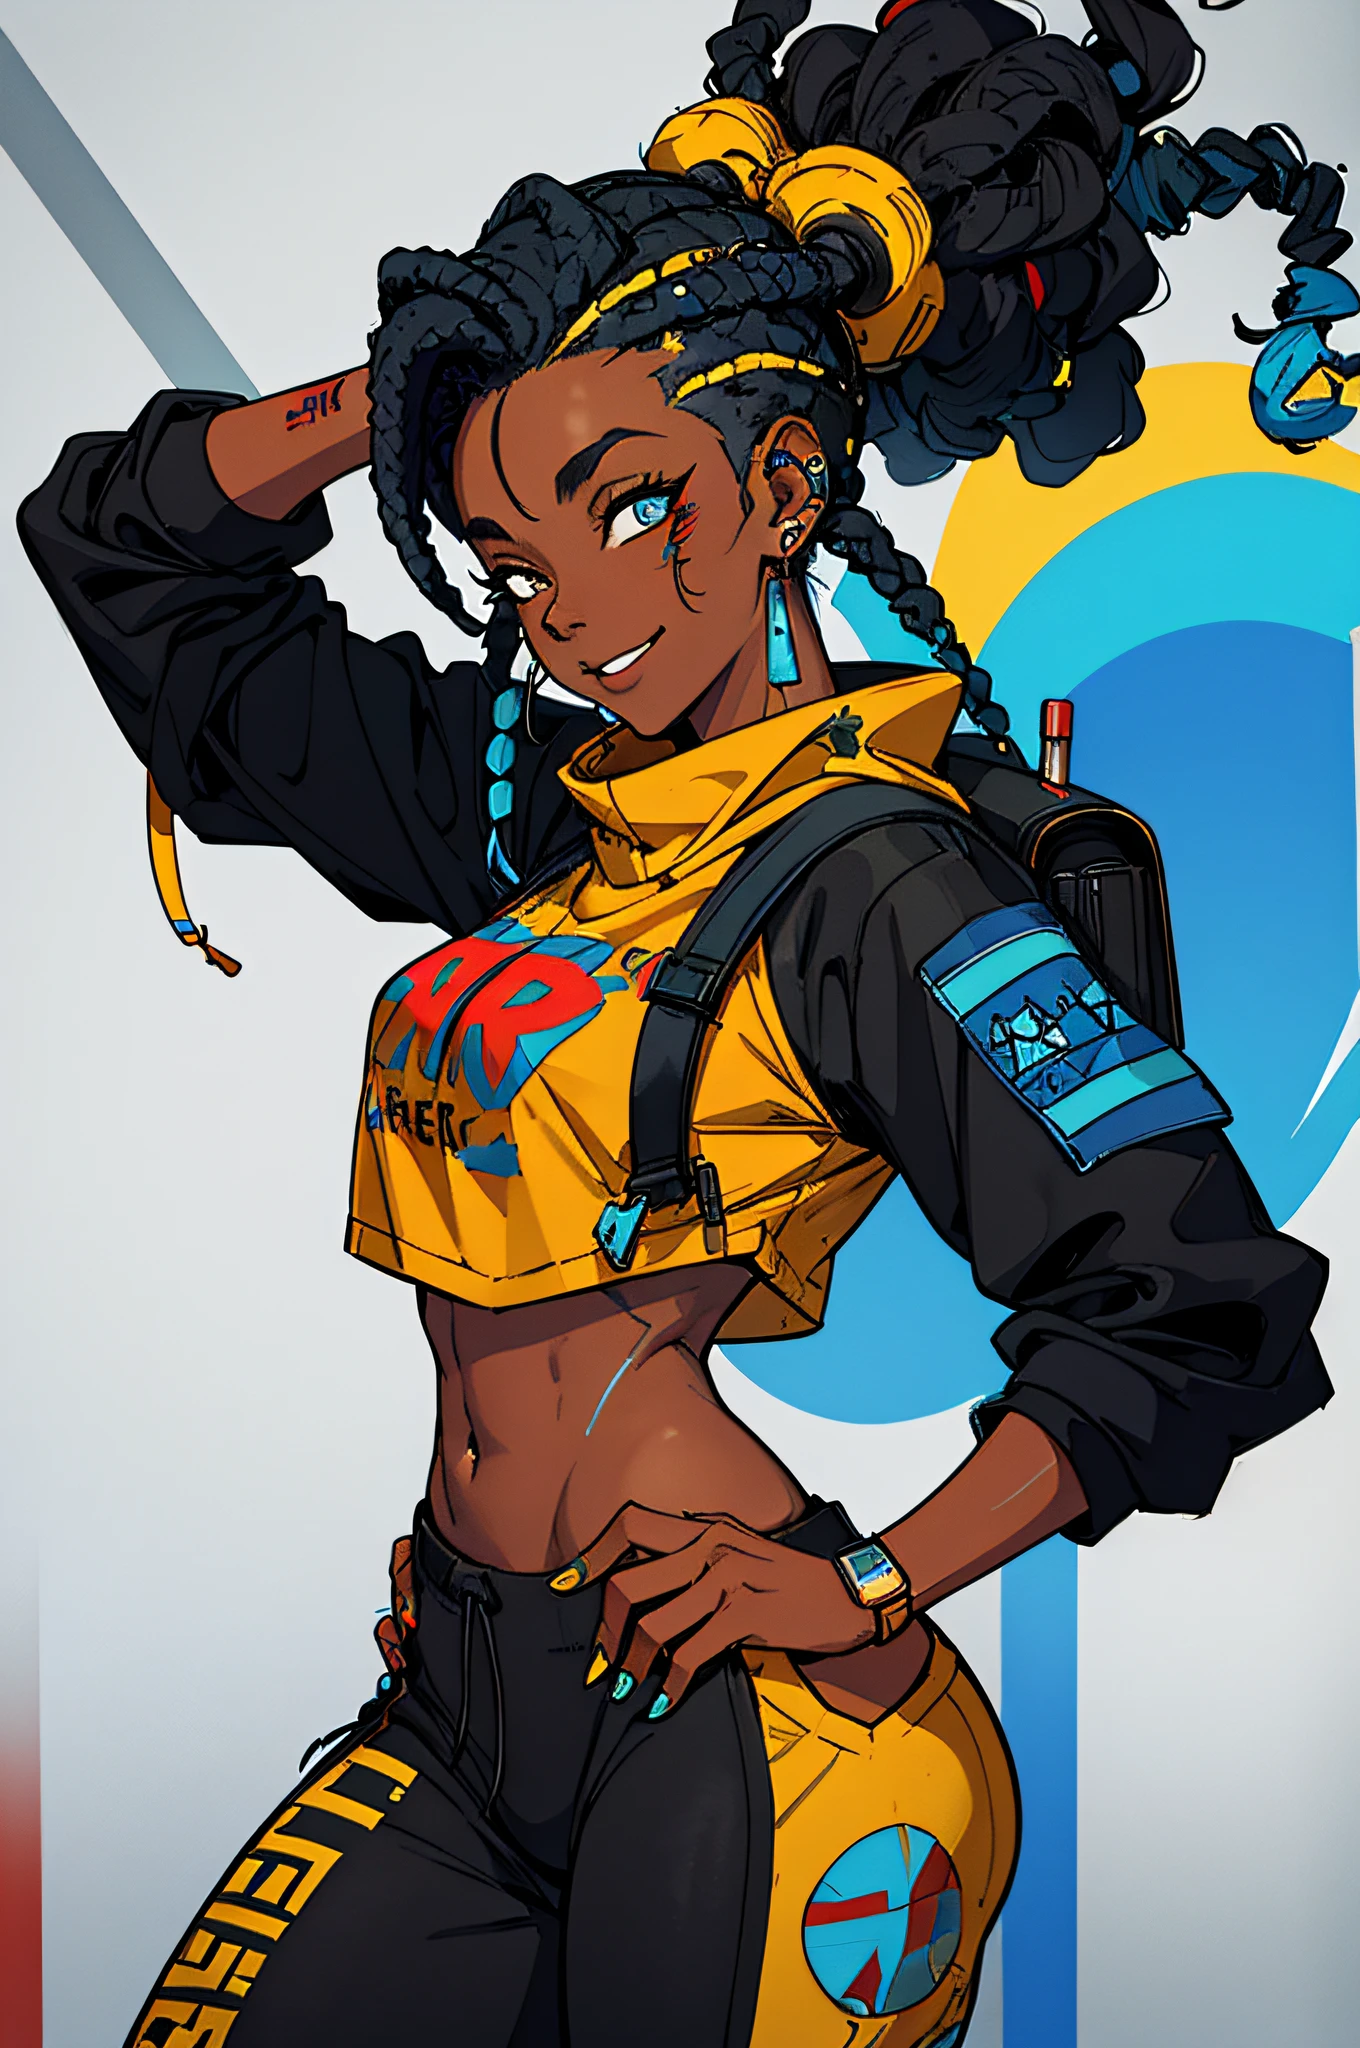 a black girl graffiti artist, headphones on ear, DJ, Music, Black and blue hair dreads, apex legends, cyberpunk character design, ,music (urban, red, yellow, blue clothing), snap back hat,  vigilante, backpack, hip-hop, crop top, headphones on ear, spray paint cans accessories, music, sexy, tight clothing smiling, fit, blue piercings,  (red, yellow, blue clothing) ( Masterpiece) ( Best Quality)